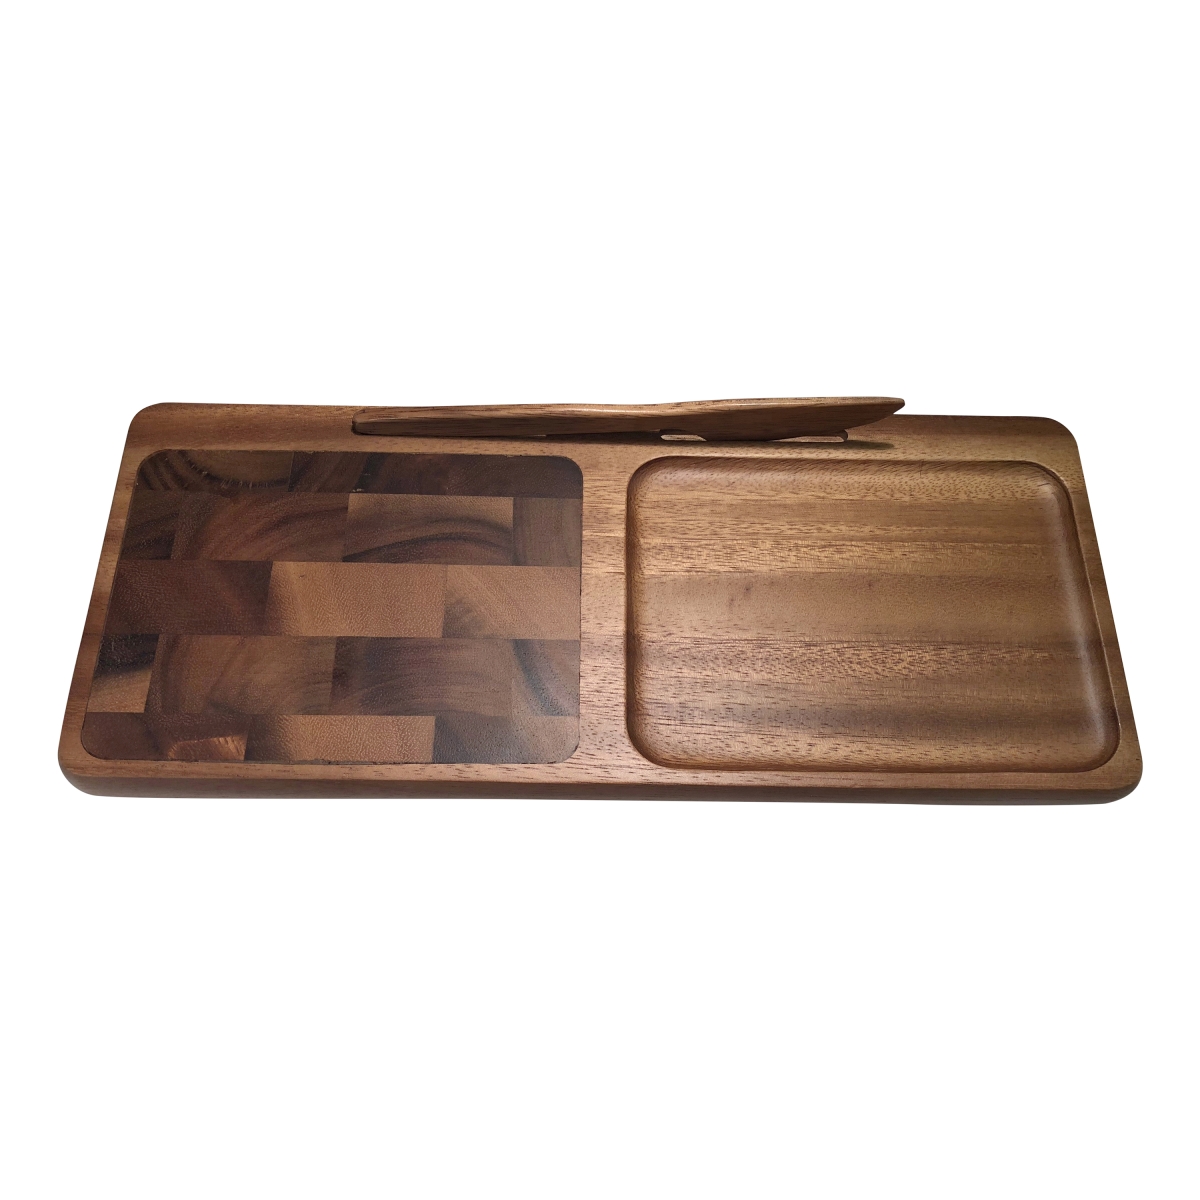 364 Cheeseboard With End Grain Inlay, Knife Included - 14 X 6 X .75 In.